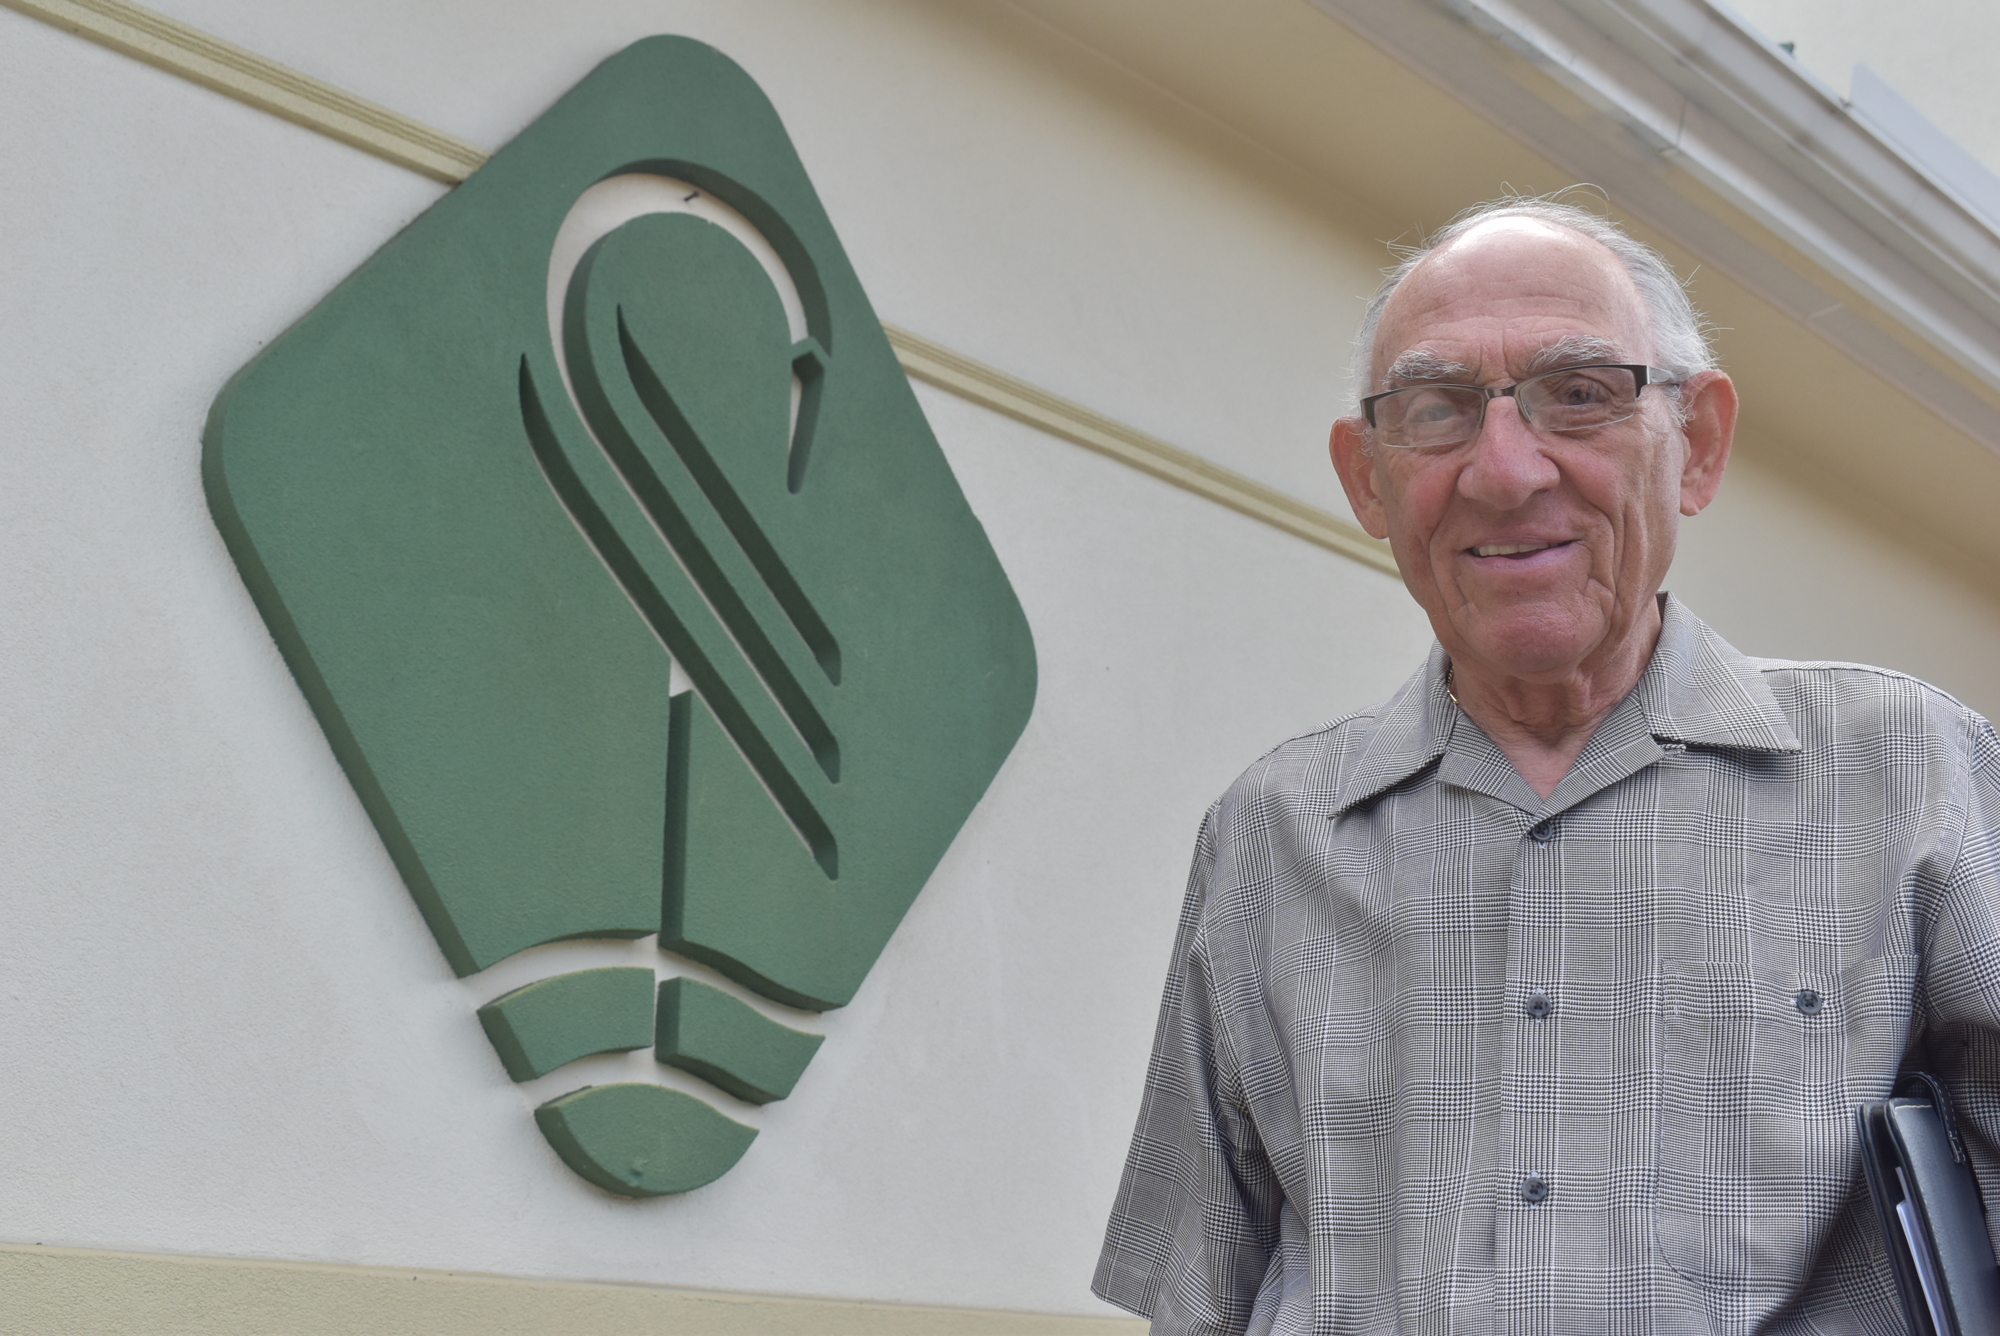 More than 50 years after first serving as a city councilor, Greenbrook’s Peter DeAngelis was appointed to the vacant seat on the Board of Supervisors for Lakewood Ranch Community Development District 4.